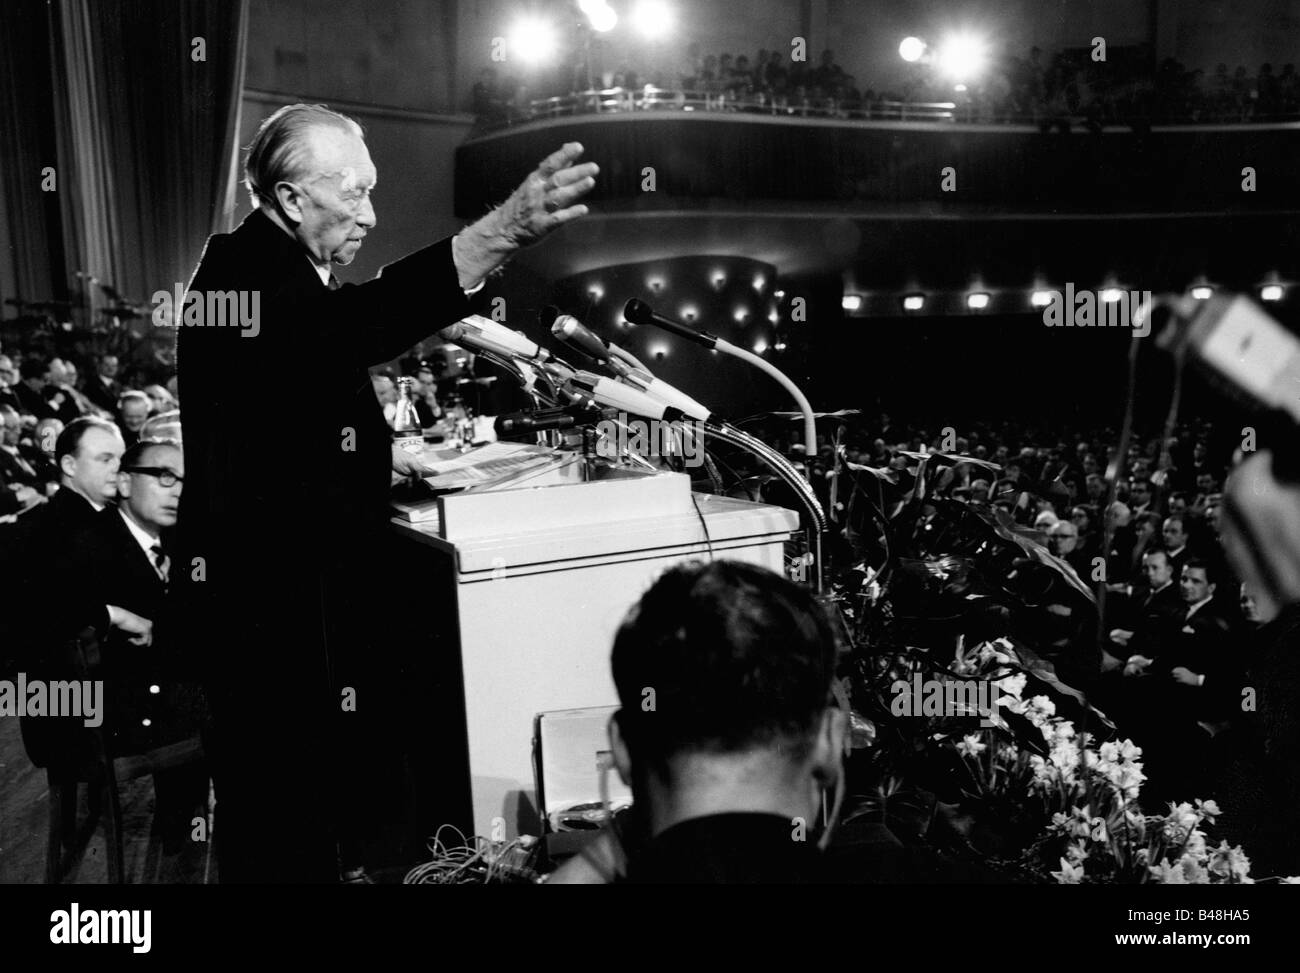 Adenauer, Konrad, 5.1.1876 - 19.4.1967, German politician (CDU) and statesman, Chancellor of Germany 1949 - 1963, half length, 13th Federal Conference of the CDU party, Duesseldorf, 28.3.1965 - 31.3.1965, , Stock Photo